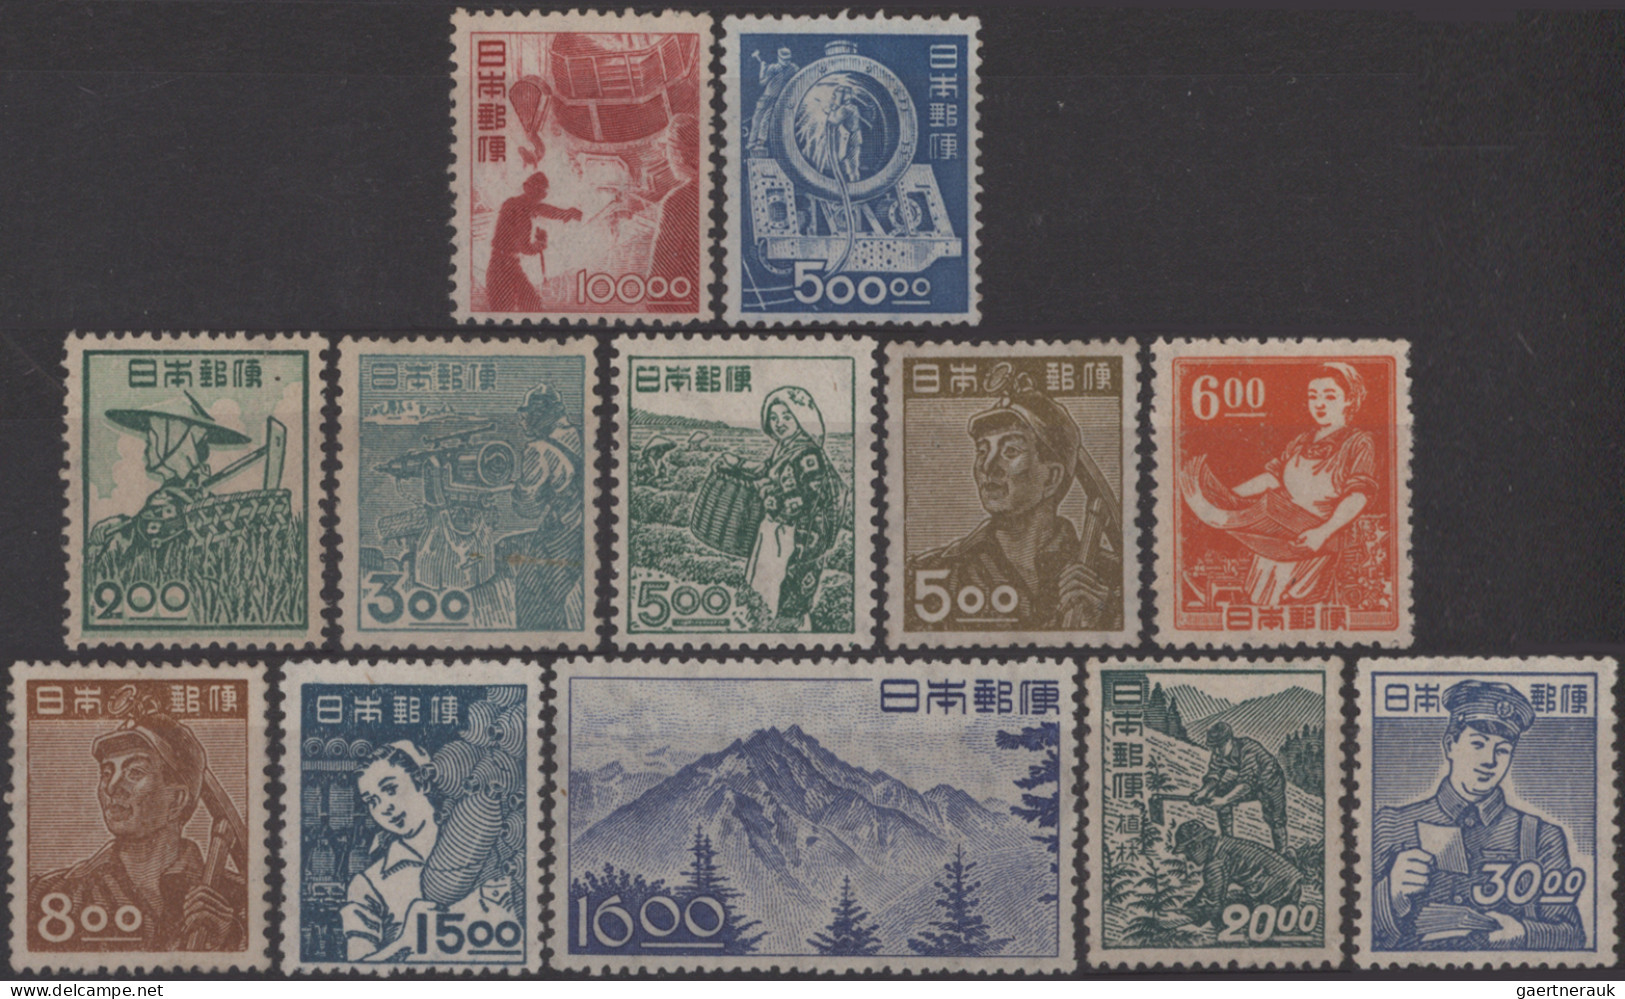 Japan: 1899/2015 (approx.), dealer stock of definitive issues in more than 110 p